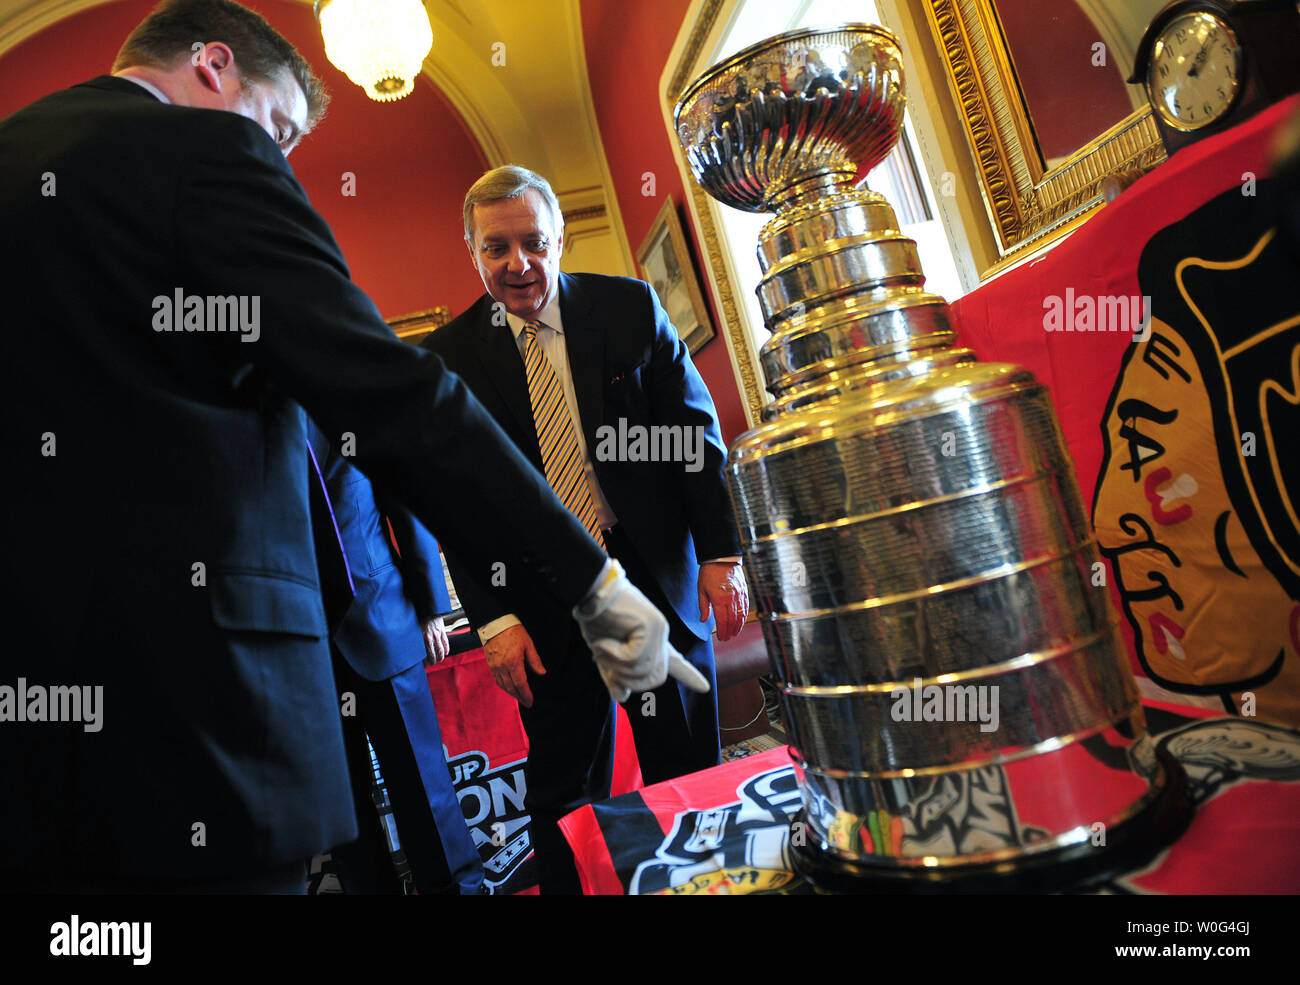 Mike Bolt (L), the keeper of the Stanley Cup, shows Sen. Richard Durbin (D-IL) where the Chicago Blackhawks name is on the Stanley Cup during a visit to Durbin's office on Capitol Hill in Washington on December 13, 2010.  The Chicago Blackhawks defeated the Philadelphia Flyers 4 games to 2 games to win the 2010 Stanley Cup championship.  UPI/Kevin Dietsch Stock Photo